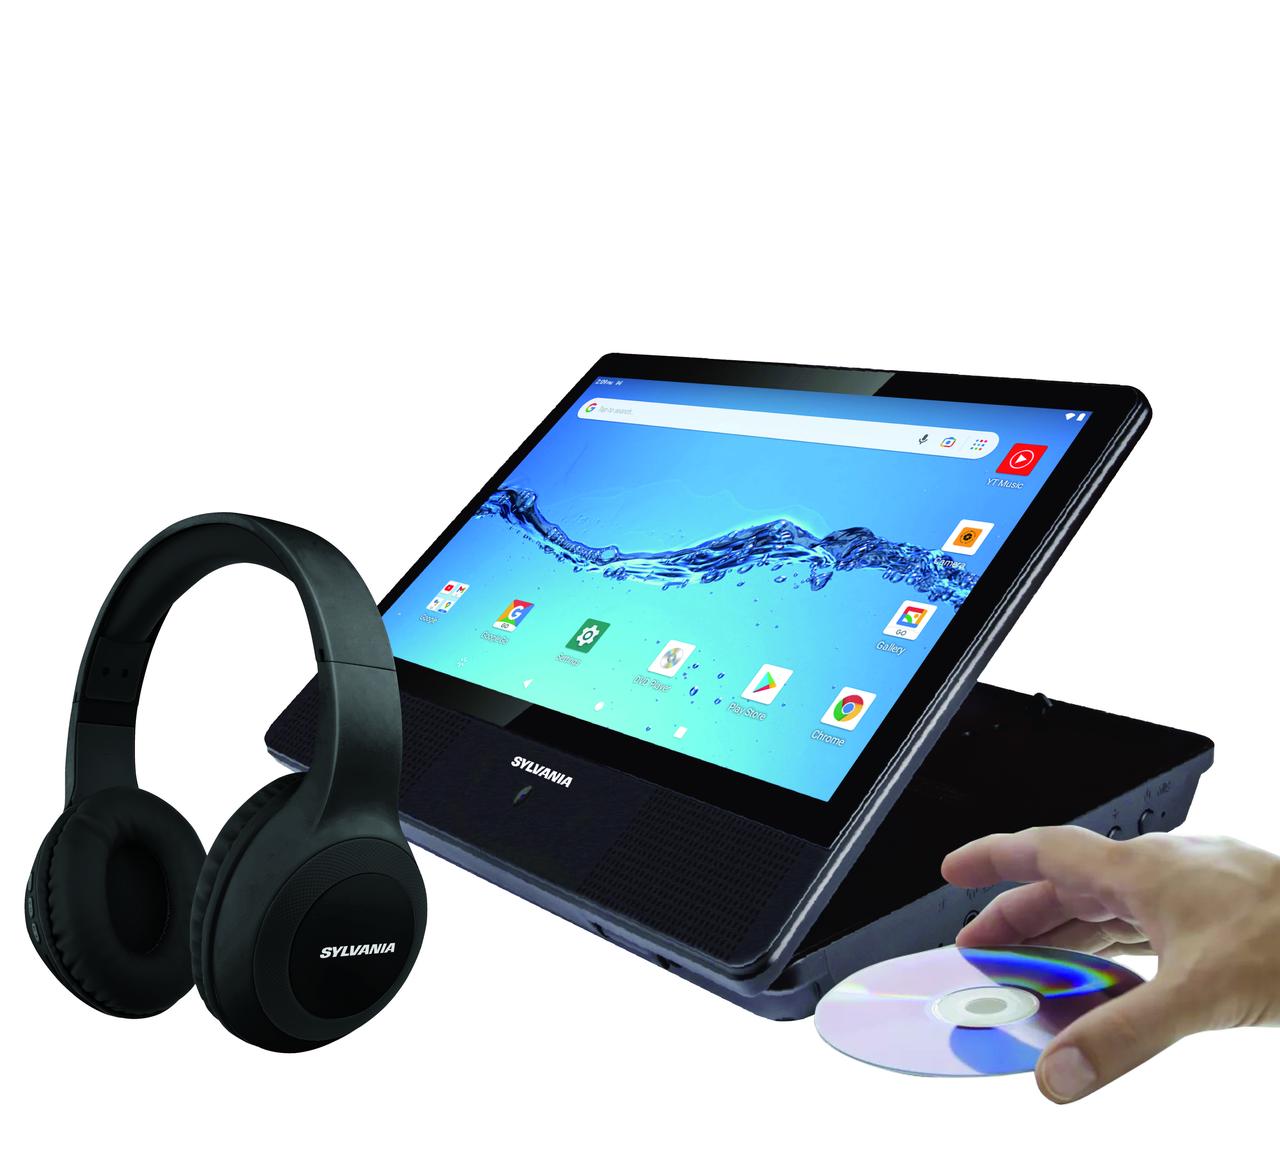 Sylvania 10.1" Quad Core Tablet/Portable DVD Combo With Bluetooth Headphones, 1GB/16GB, Android 10, SLTDVD1024_Combo - image 1 of 6